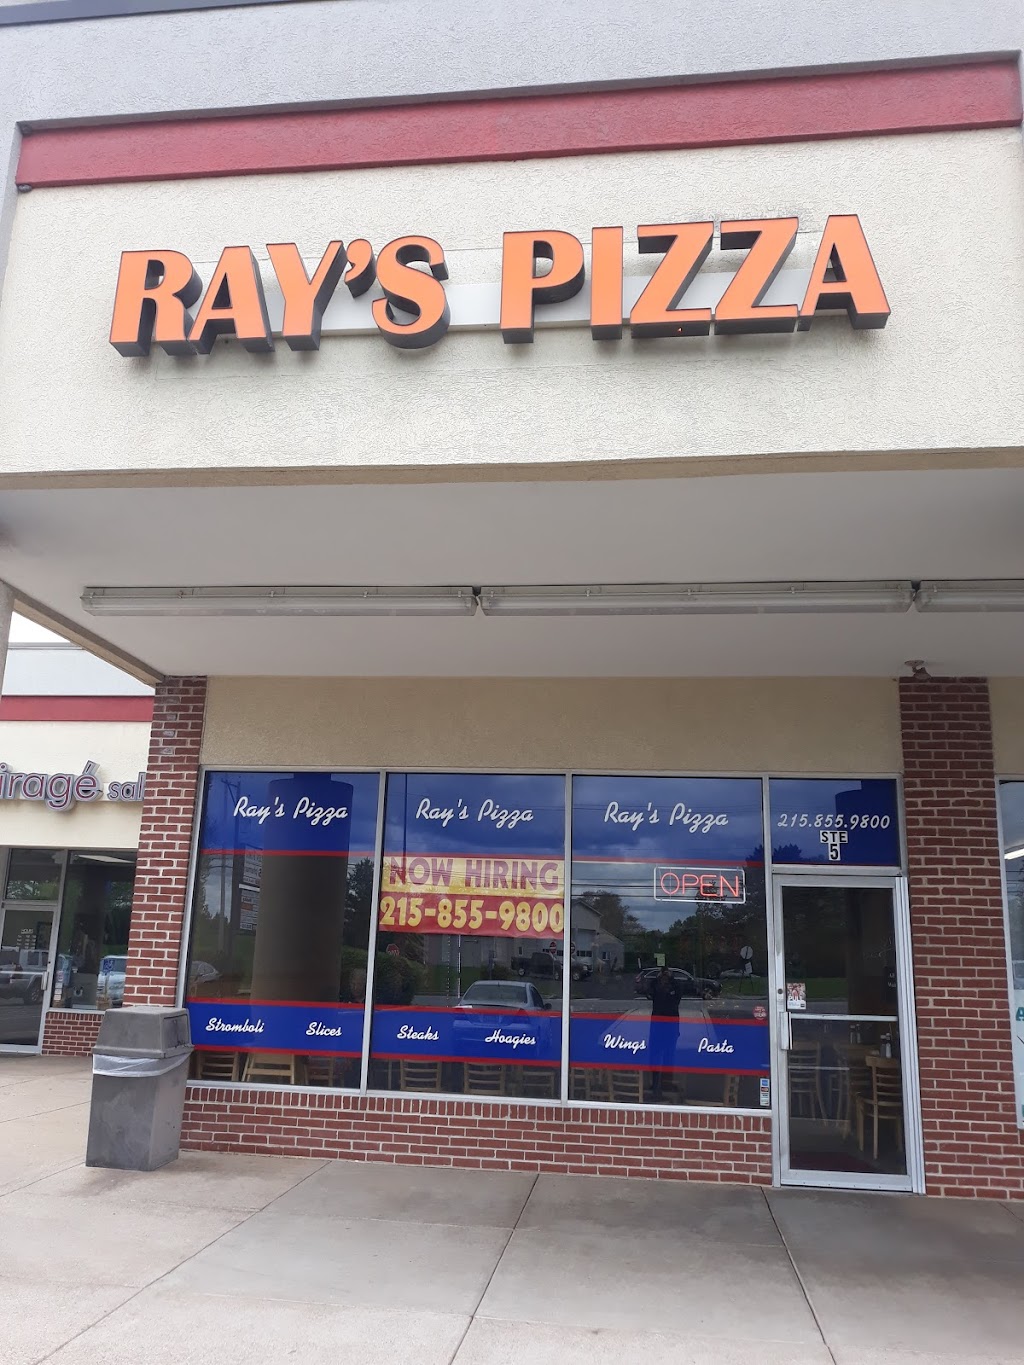 Rays Pizzeria & Steaks | 850 S Valley Forge Rd, Lansdale, PA 19446 | Phone: (215) 855-9800